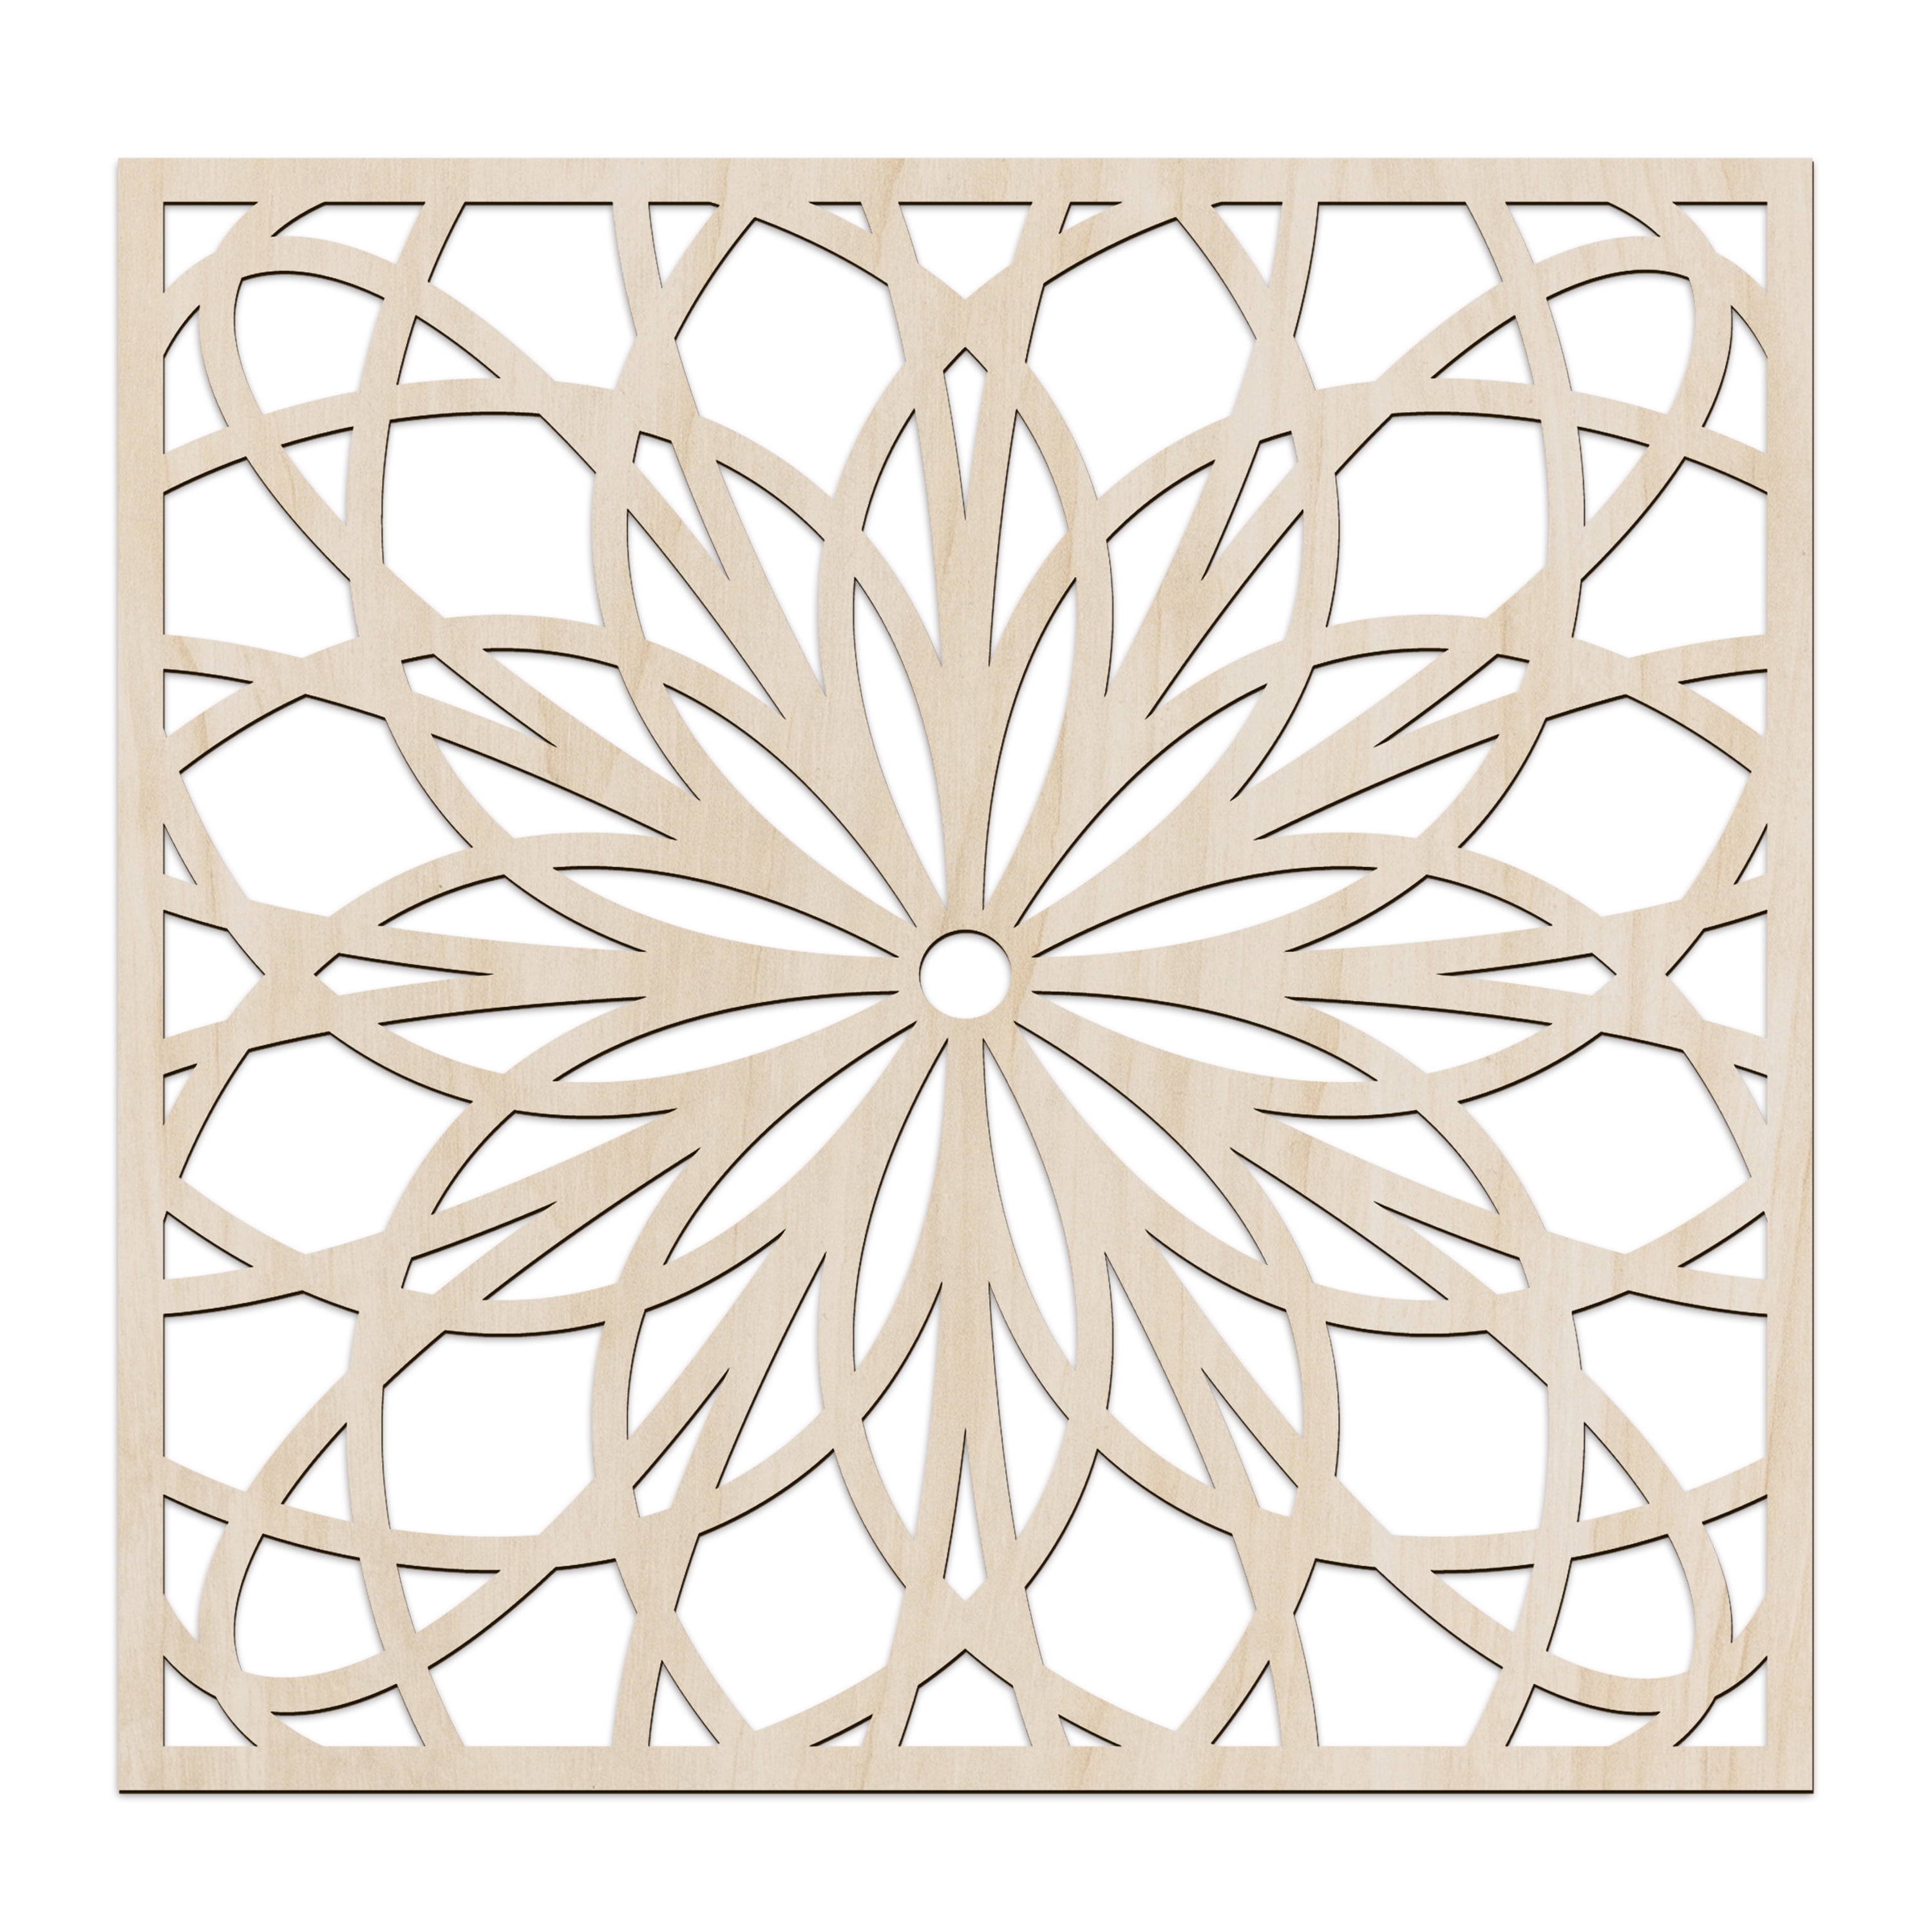 Floral Lattice Motif Boho Oriental 11.4 X 11.4 X 0.1 Ambesonne Mandala Wooden Wall Art Set of 2 Birch Wood Plywood Rustic Wall Art Accent for Hallway Bedroom Living Room Cafes and Offices